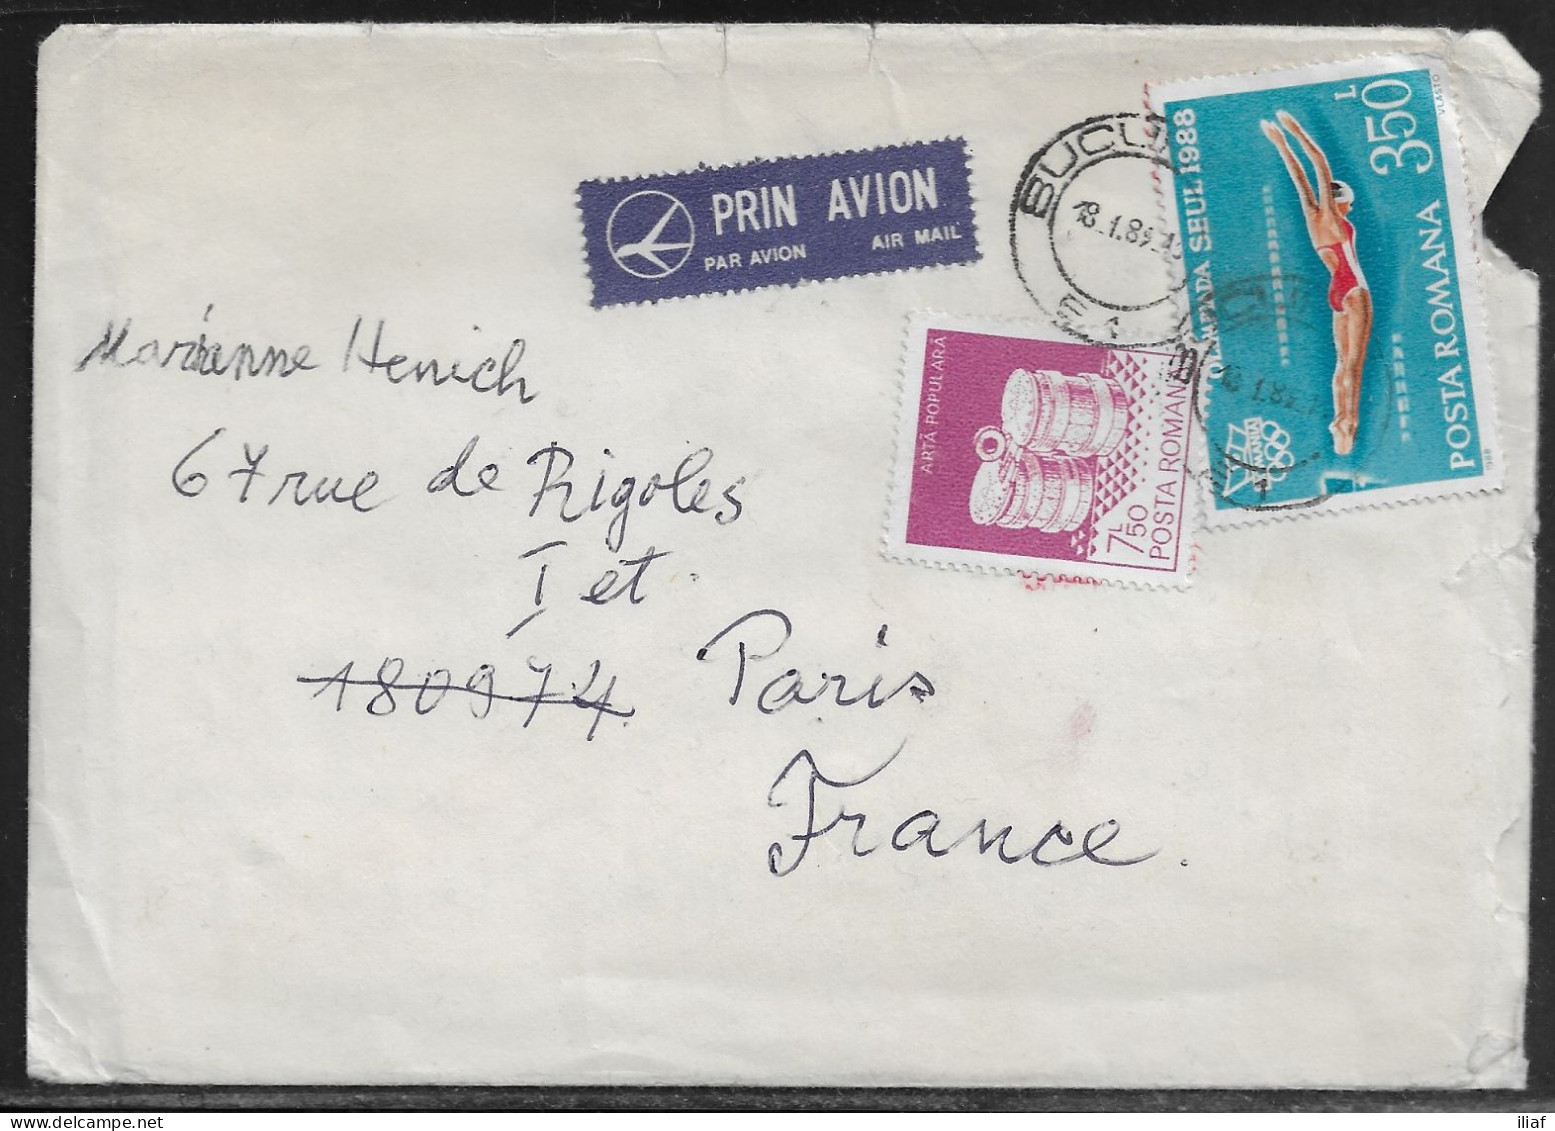 Romania. Stamps Sc. 3112, 3530 On Air Mail Letter, Sent From Bucharest On 18.01.1989 To France. Letter Inside - Covers & Documents